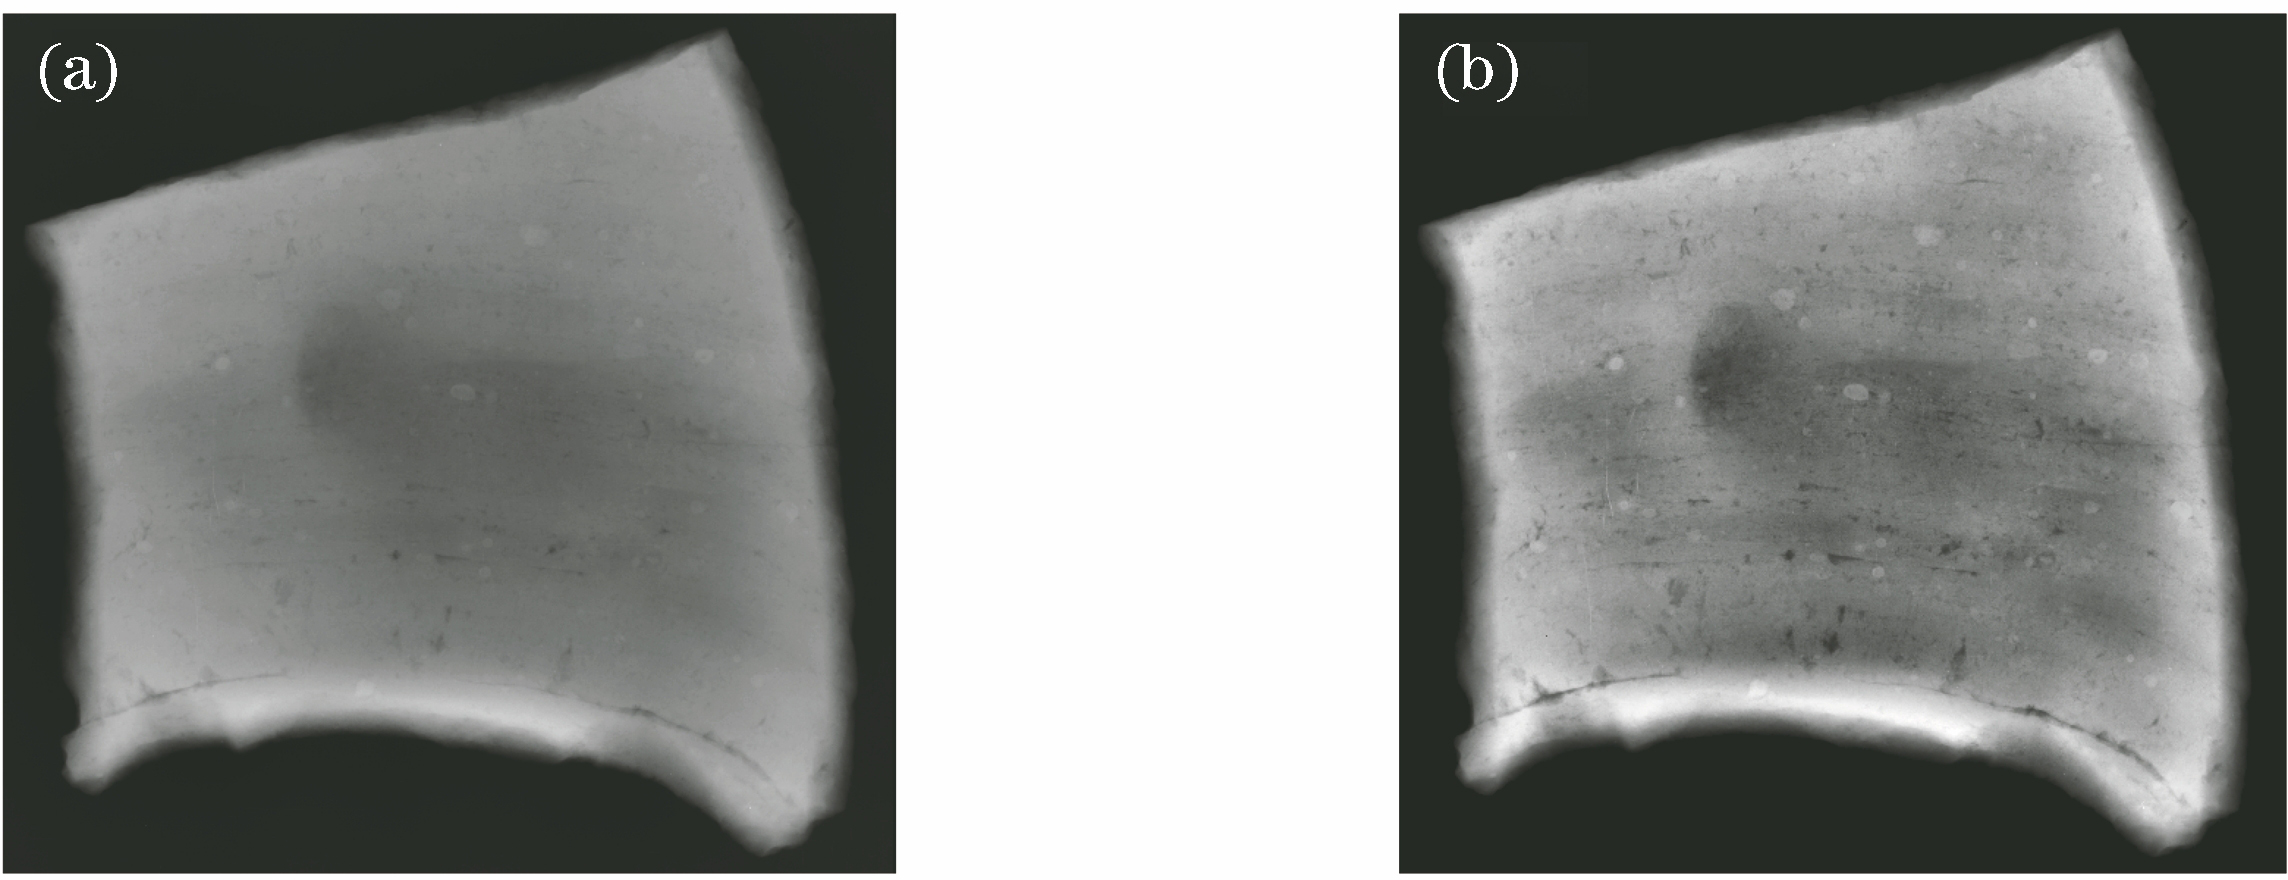 X-ray images of ceramic shard before and after image enhancement. (a) Original image; (b) enhanced image